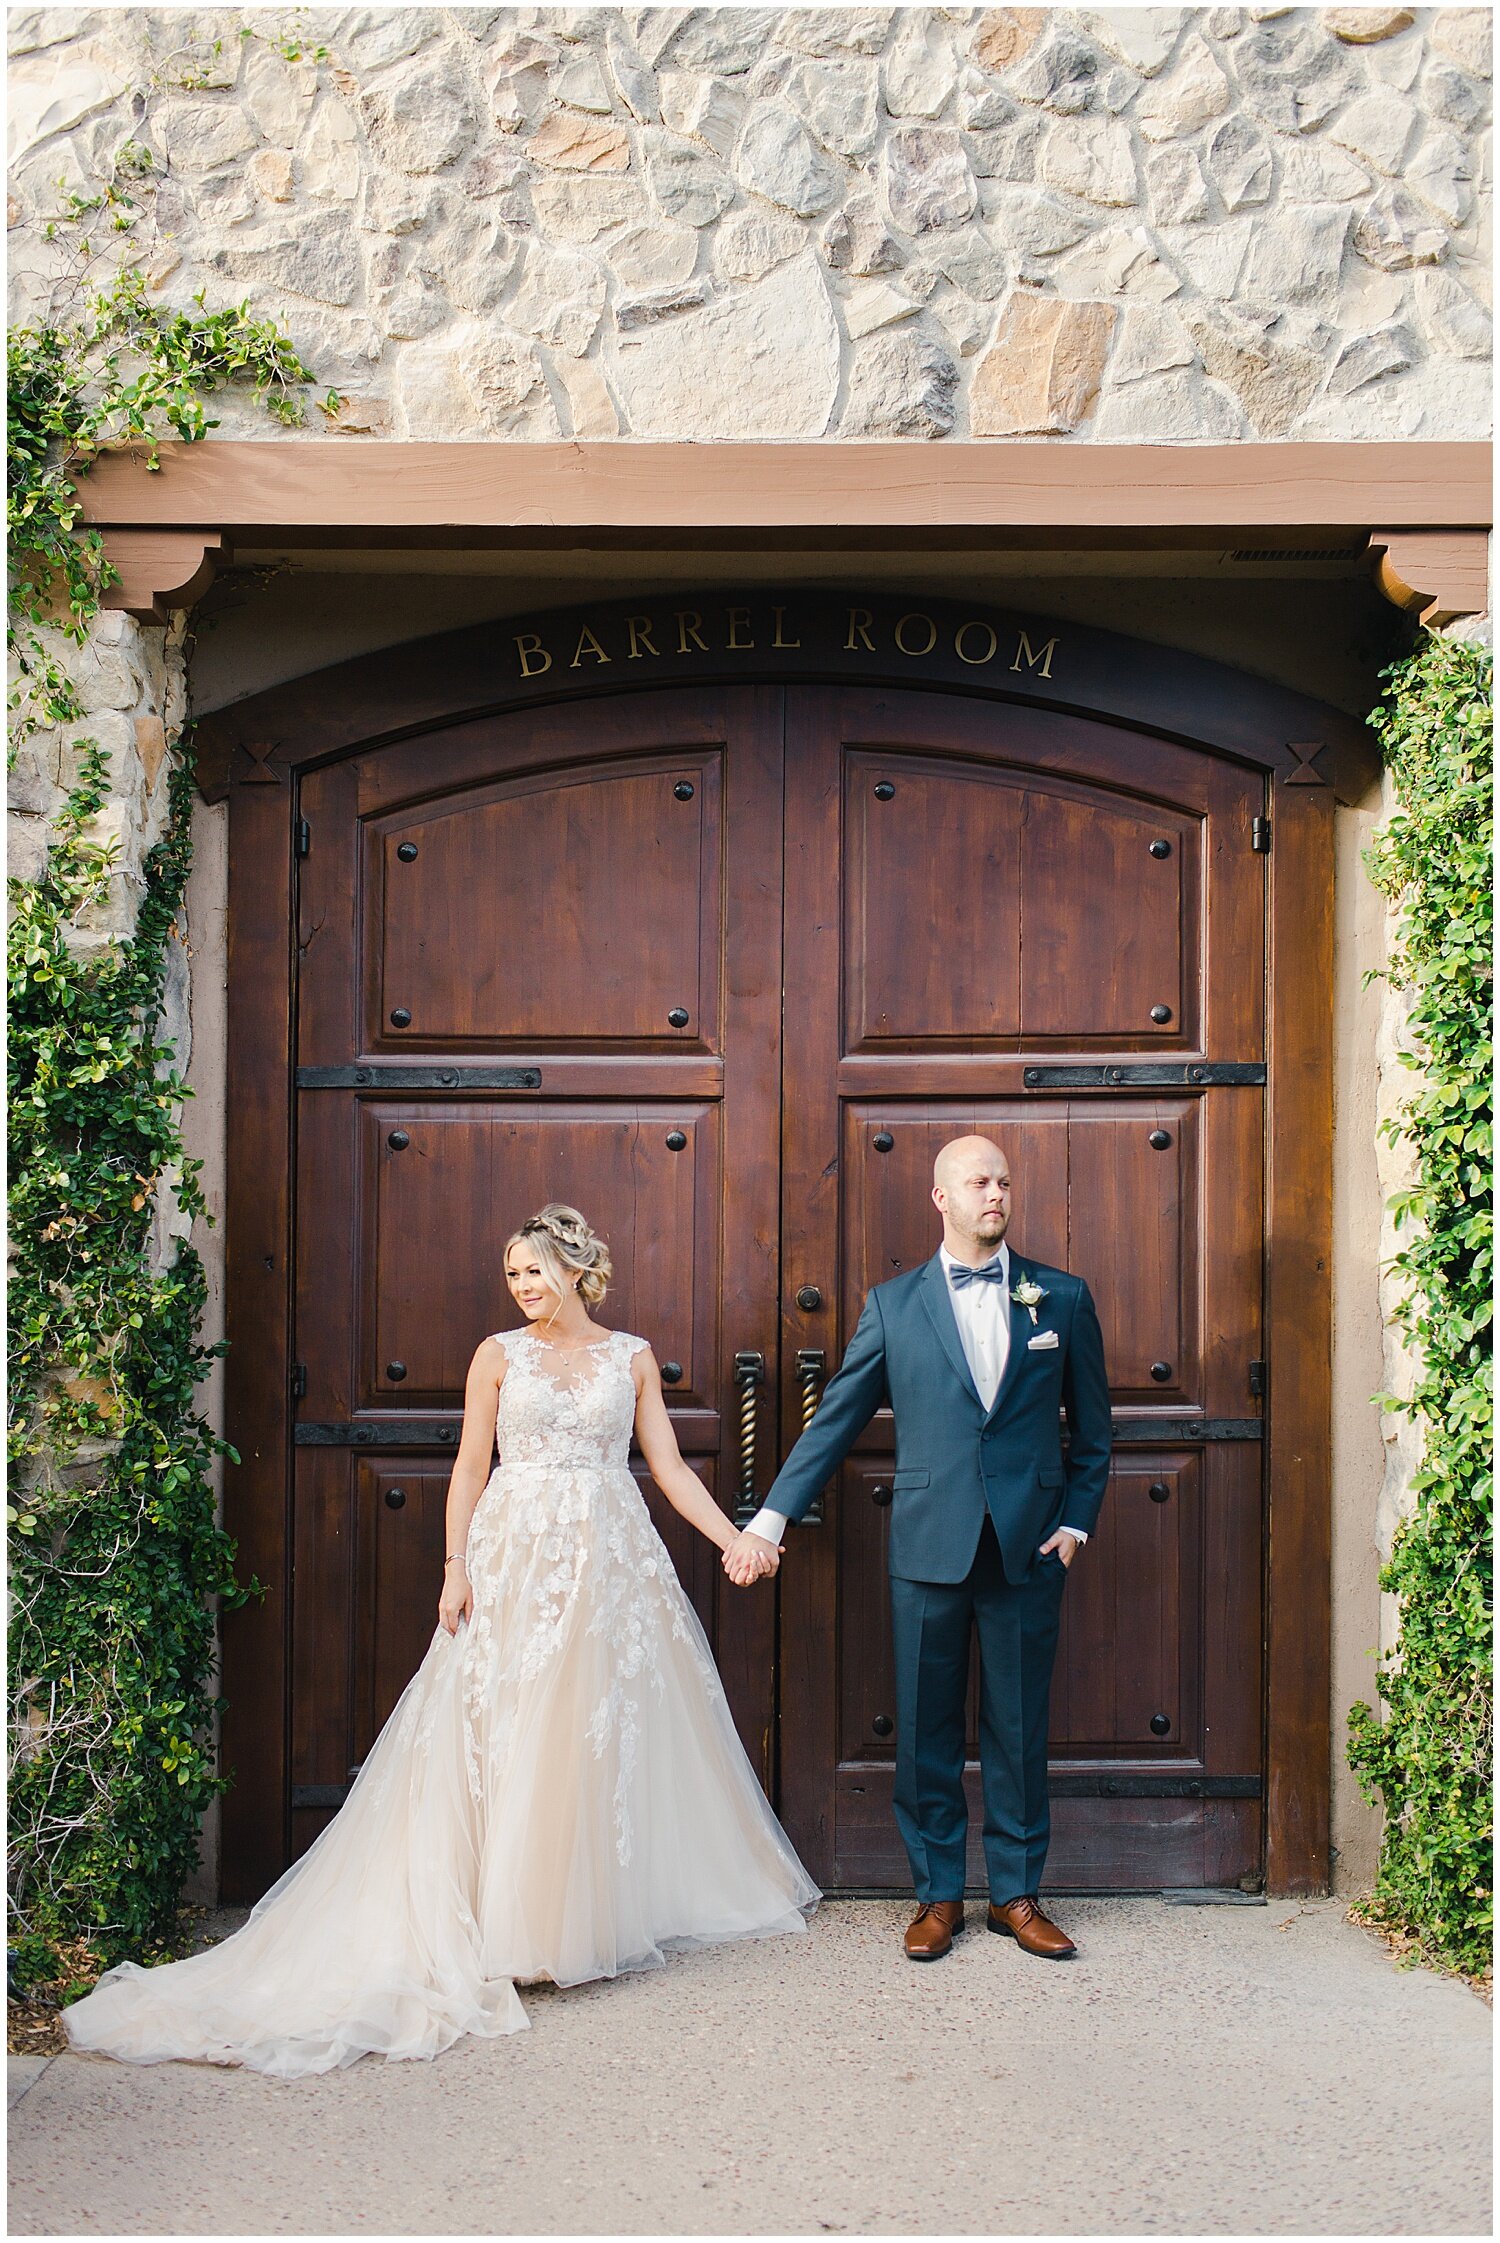 Bride and groom portrait outside barrel room at Ponte Winery in Temecula